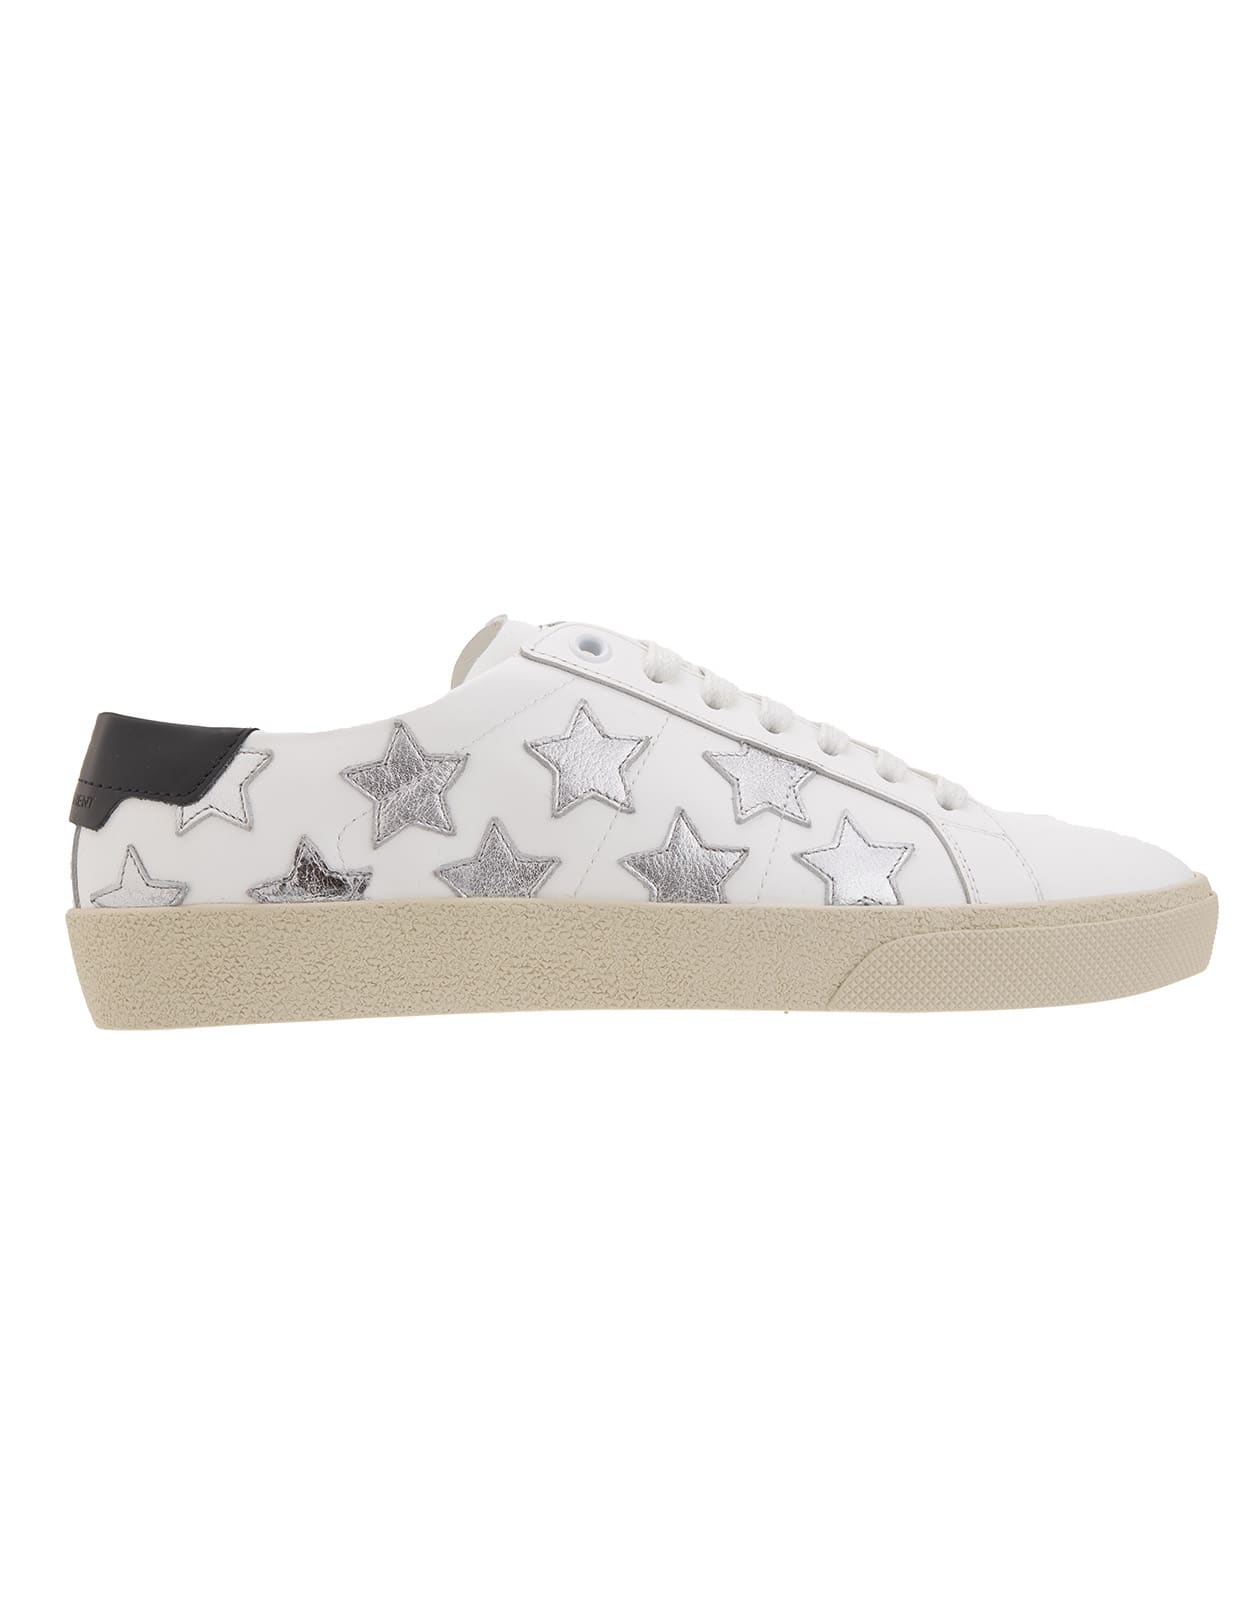 Saint Laurent Signature California Sneakers In White And Silver Leather